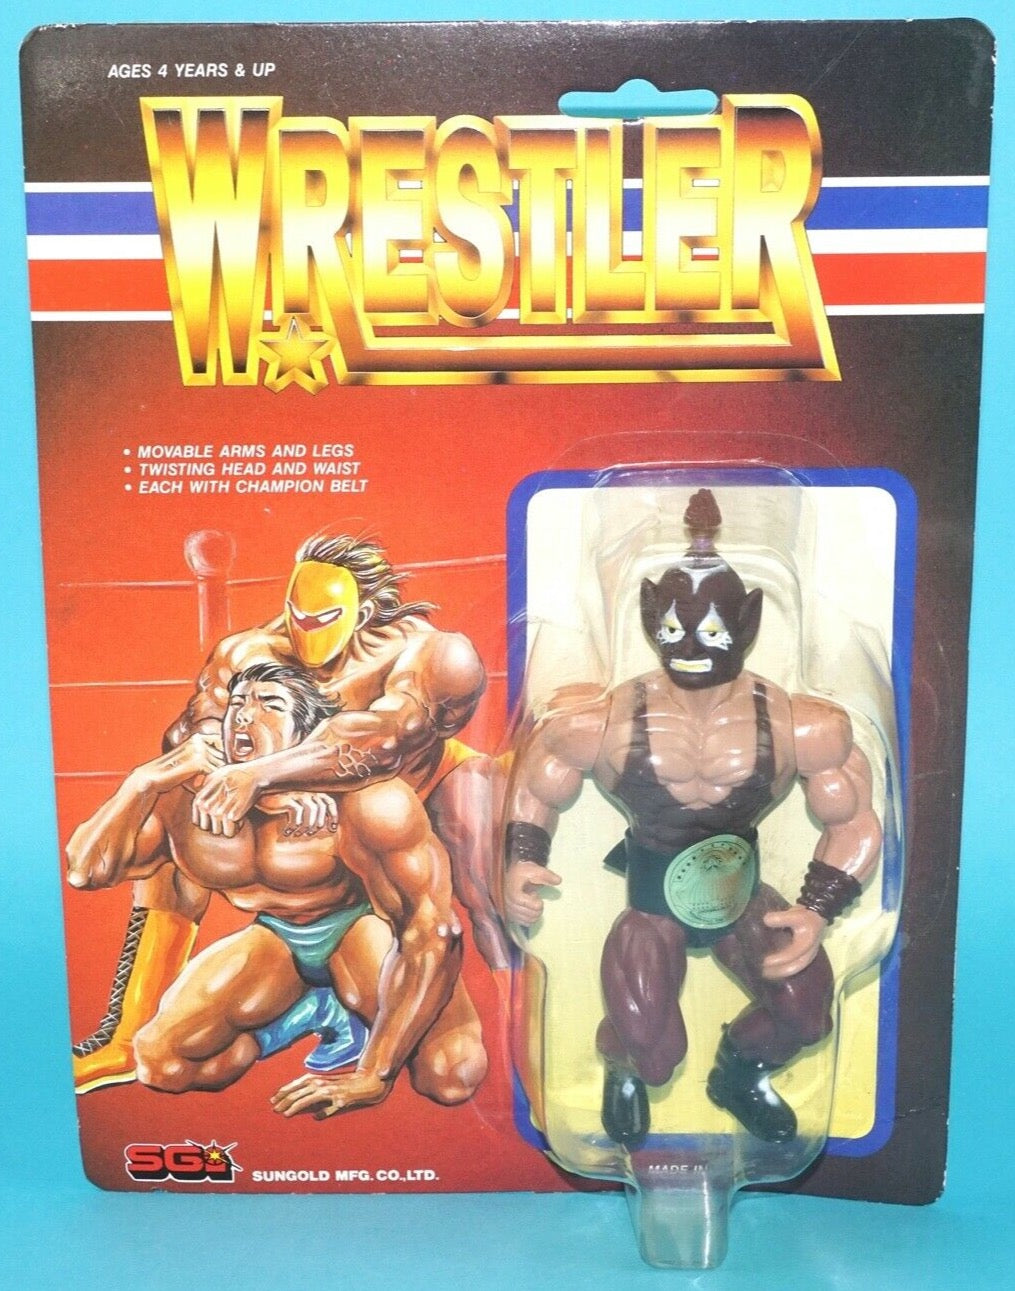 Sungold Bootleg/Knockoff Wrestlers